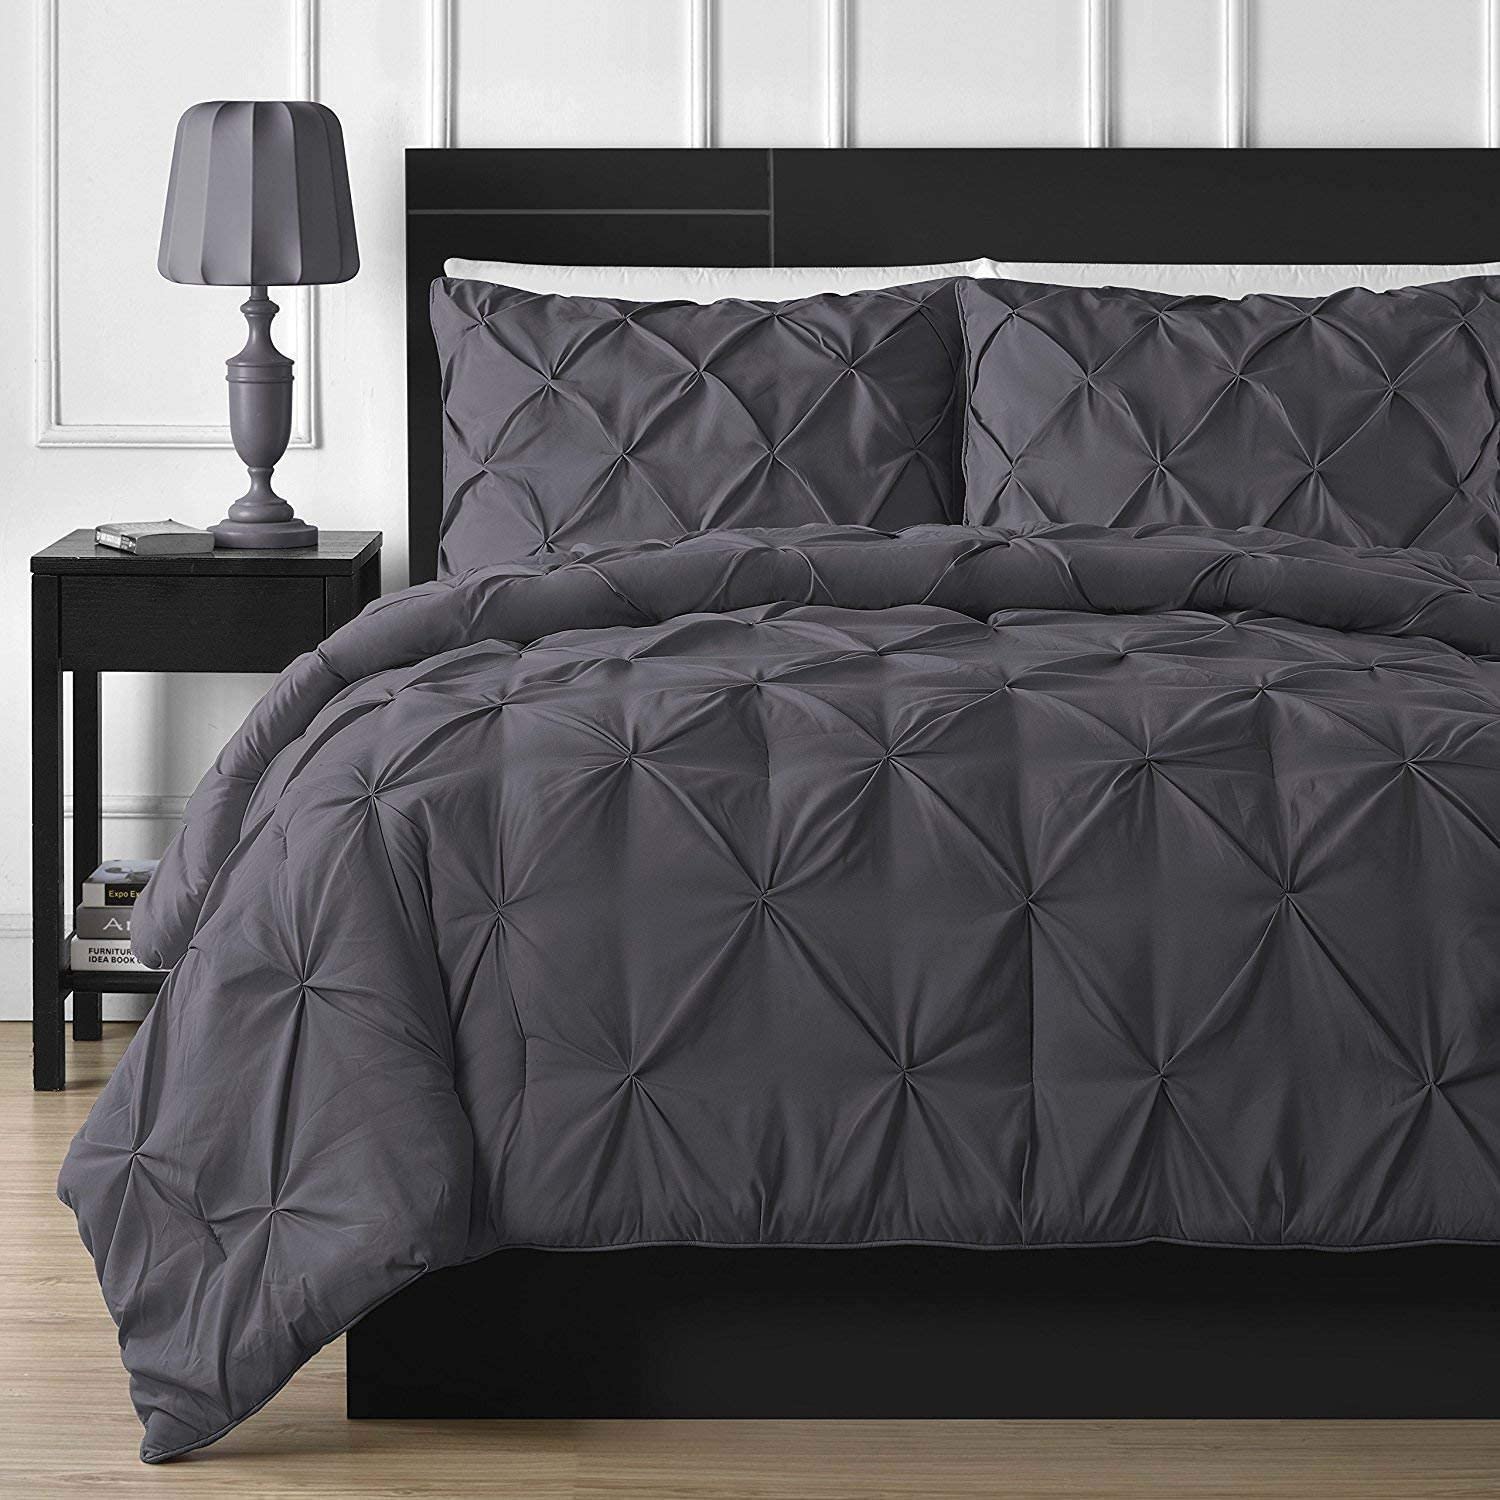 Price:$89.99  Collection Luxuriate Hotel 1000-TC Hypoallergenic Ultra Soft 100% Egyptian Cotton 98x108 inch Super King Size Dark Gray Solid Pinch Plated Duvet Cover with Zipper Colser & 2pcs Pillow Case Set : Arts, Crafts & Sewing